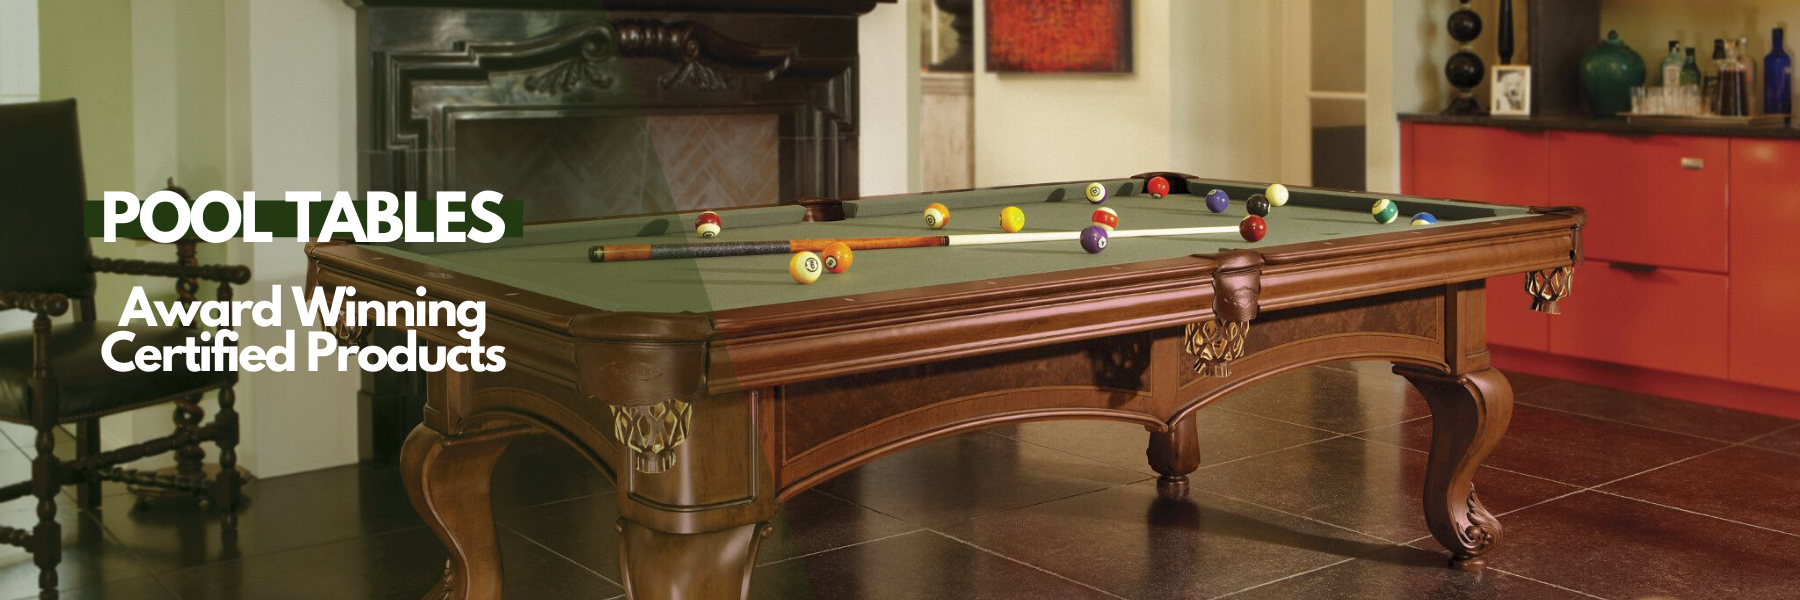 Why Should You Buy A Brunswick Pool Table?